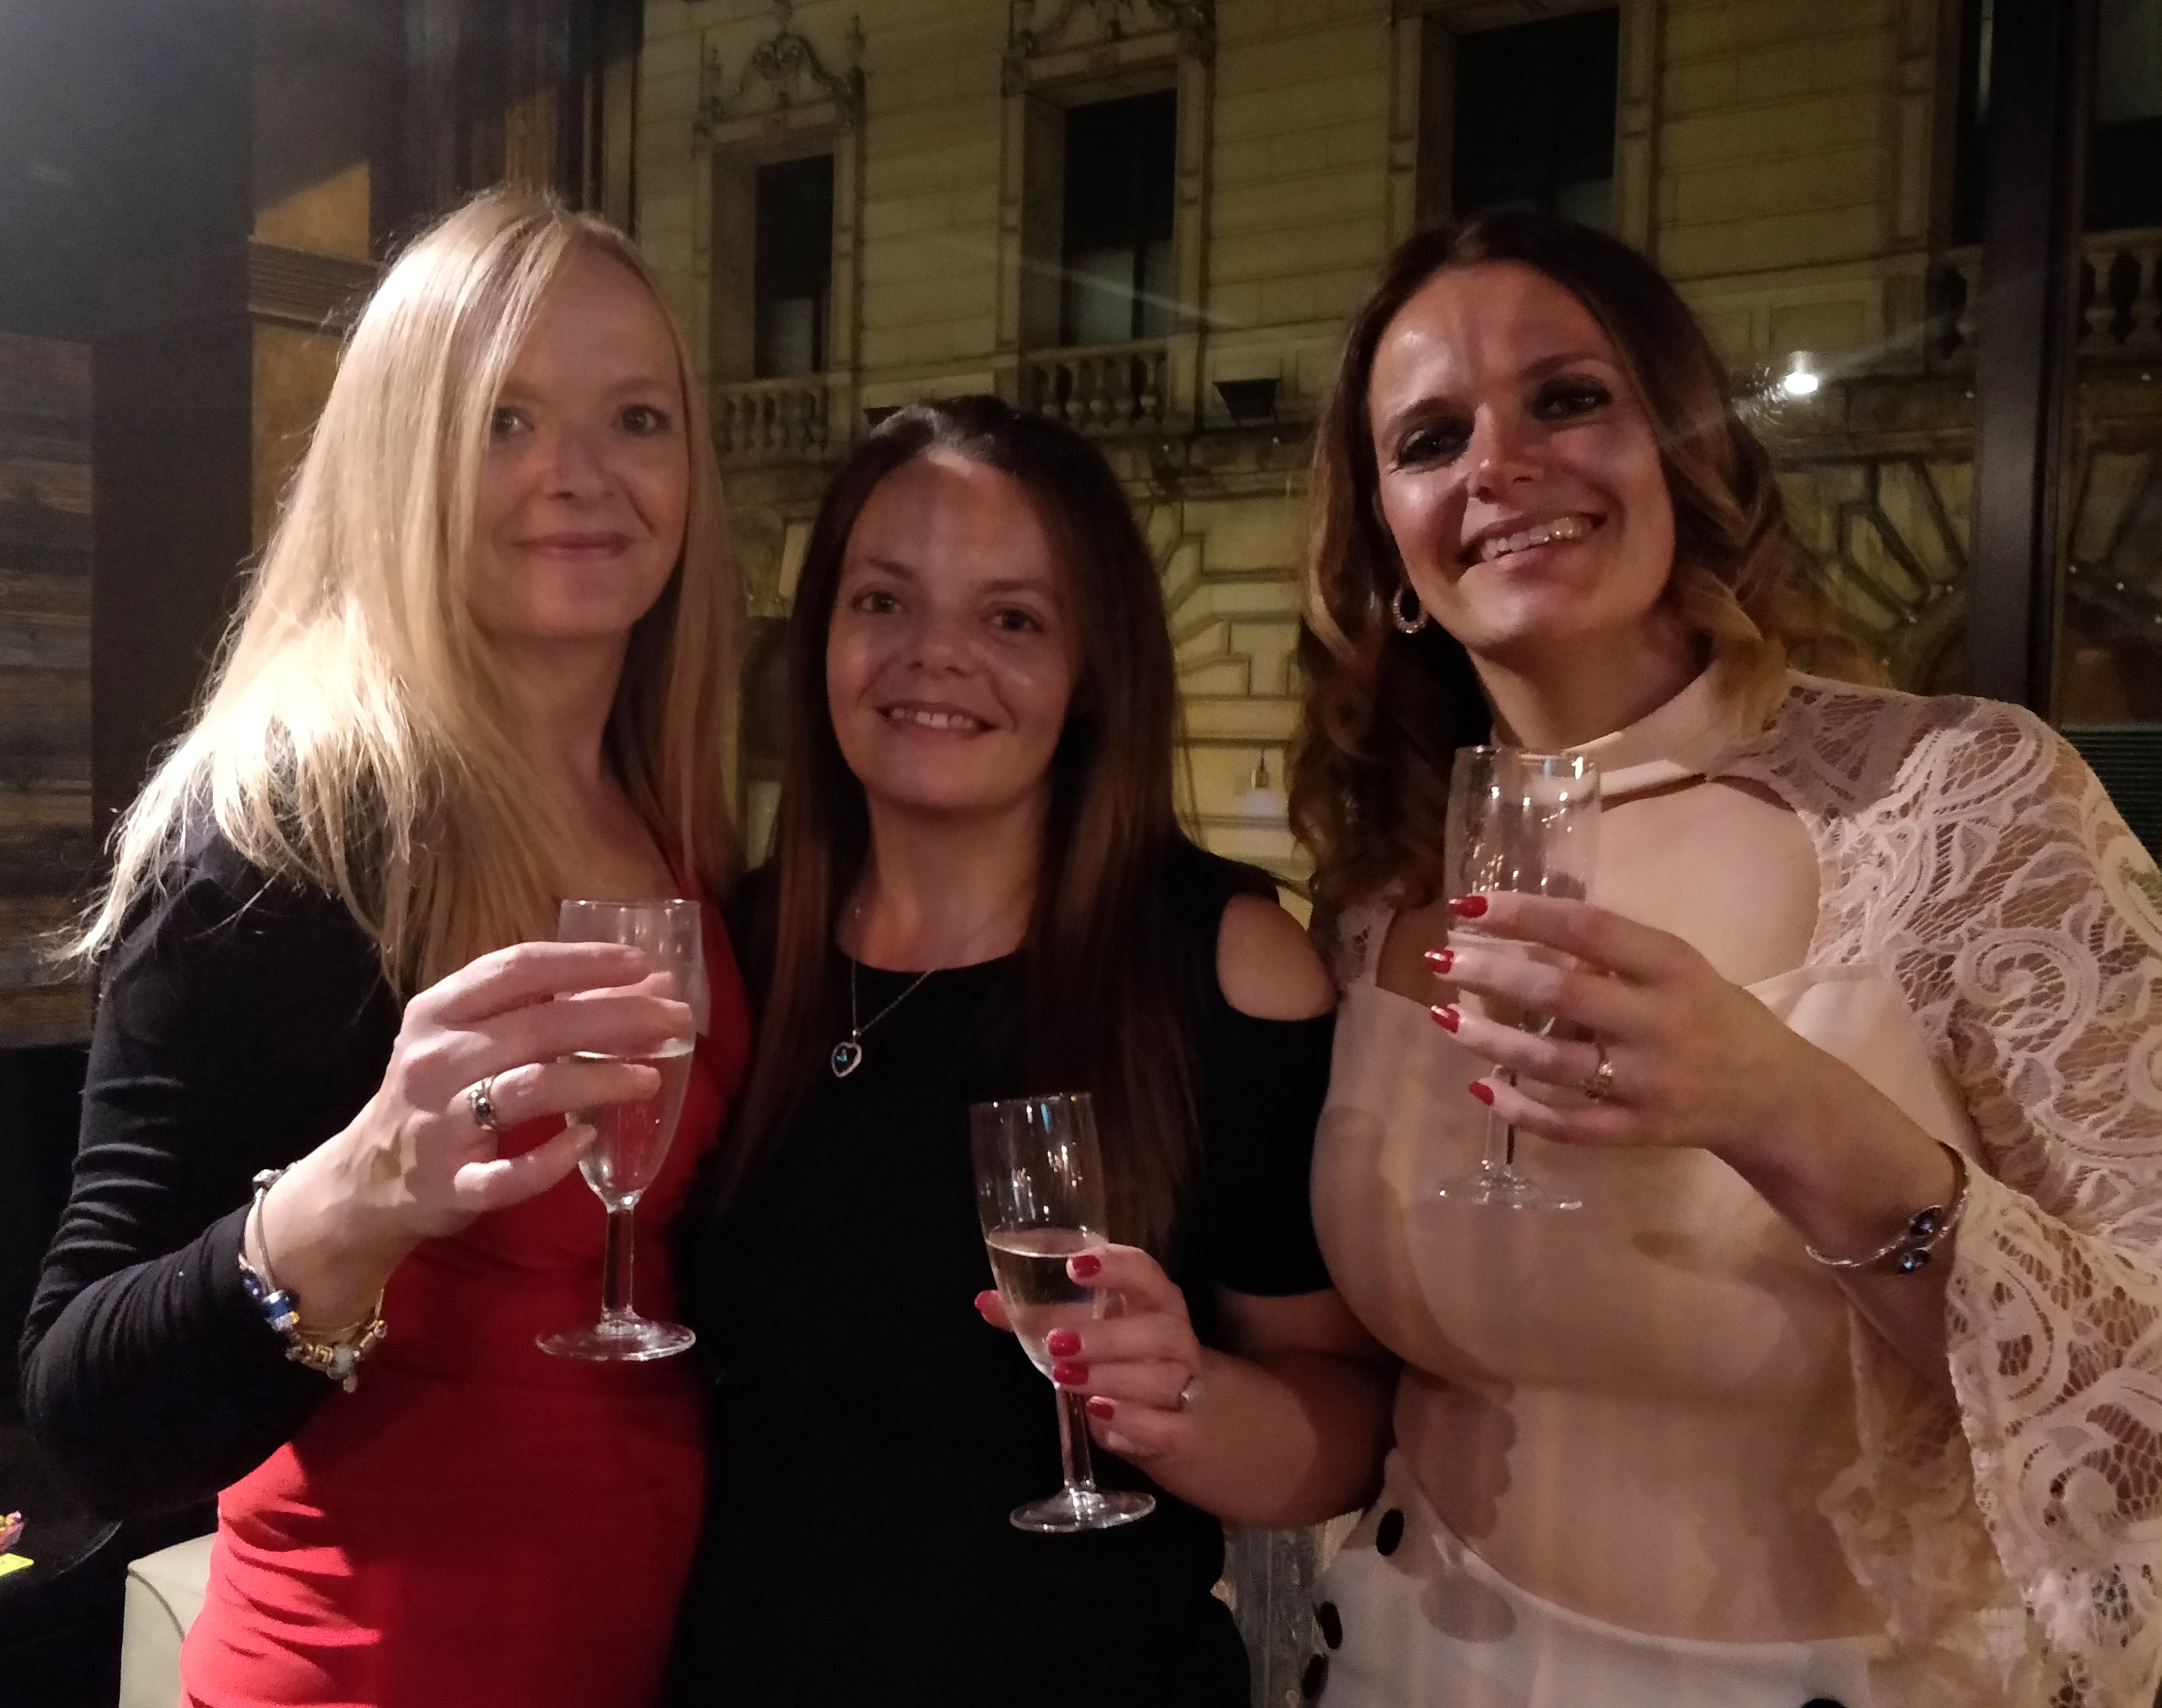 These three lucky ladies won a bottle of Champagne in the Moshi Monster Meet Up challenge.